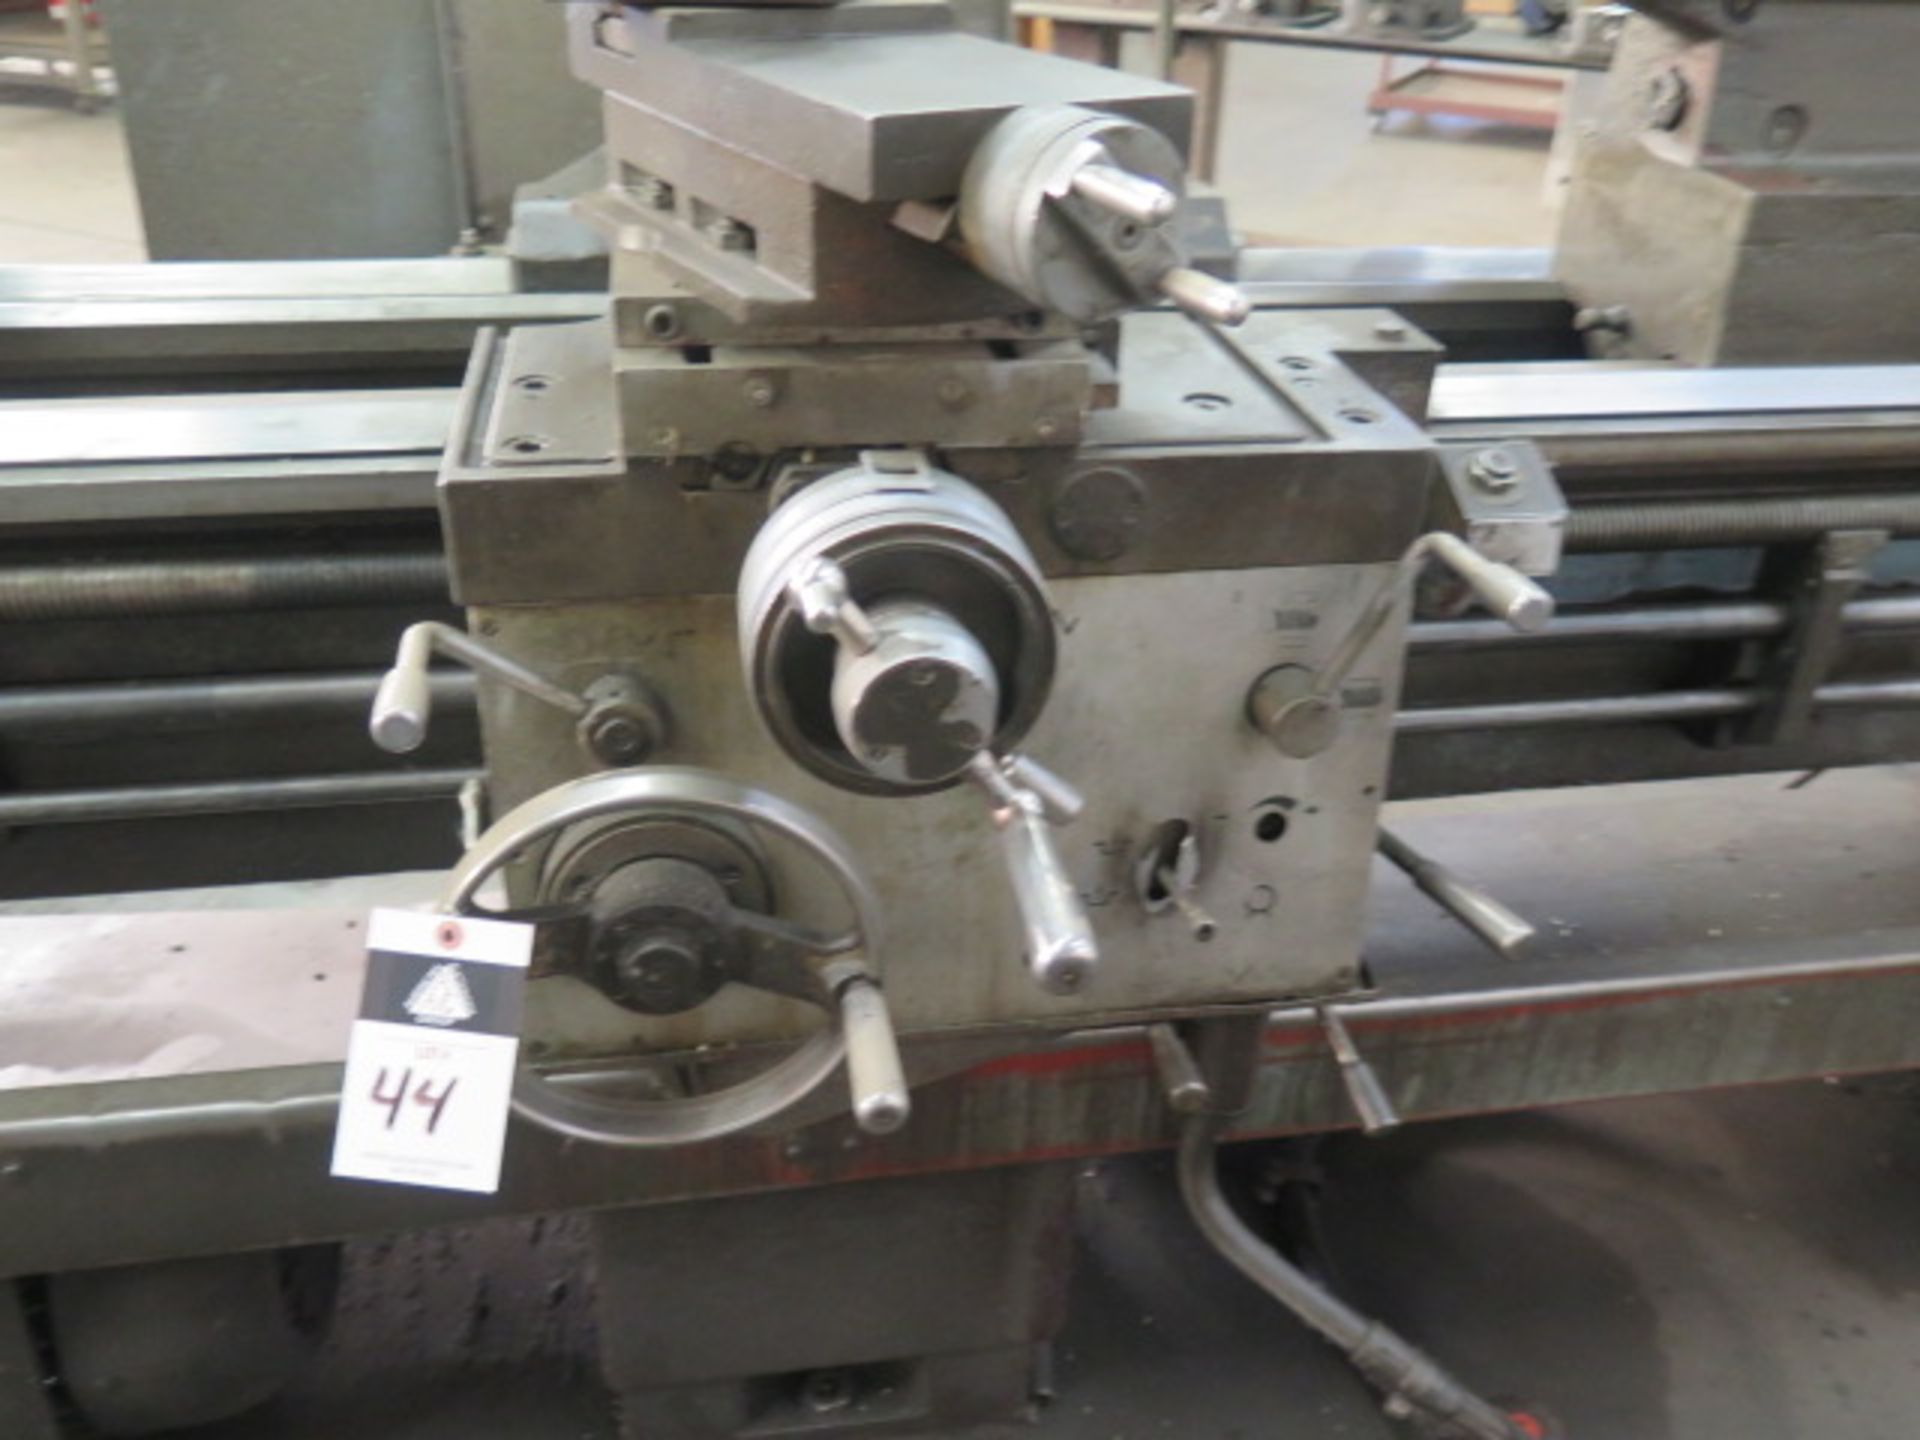 Ponar TUR-63 25” x 128” Geared Head Lathe s/n 1310 w/ 28-1200 RPM, 3 ½” Thru Spindle, SOLD AS IS - Image 8 of 14